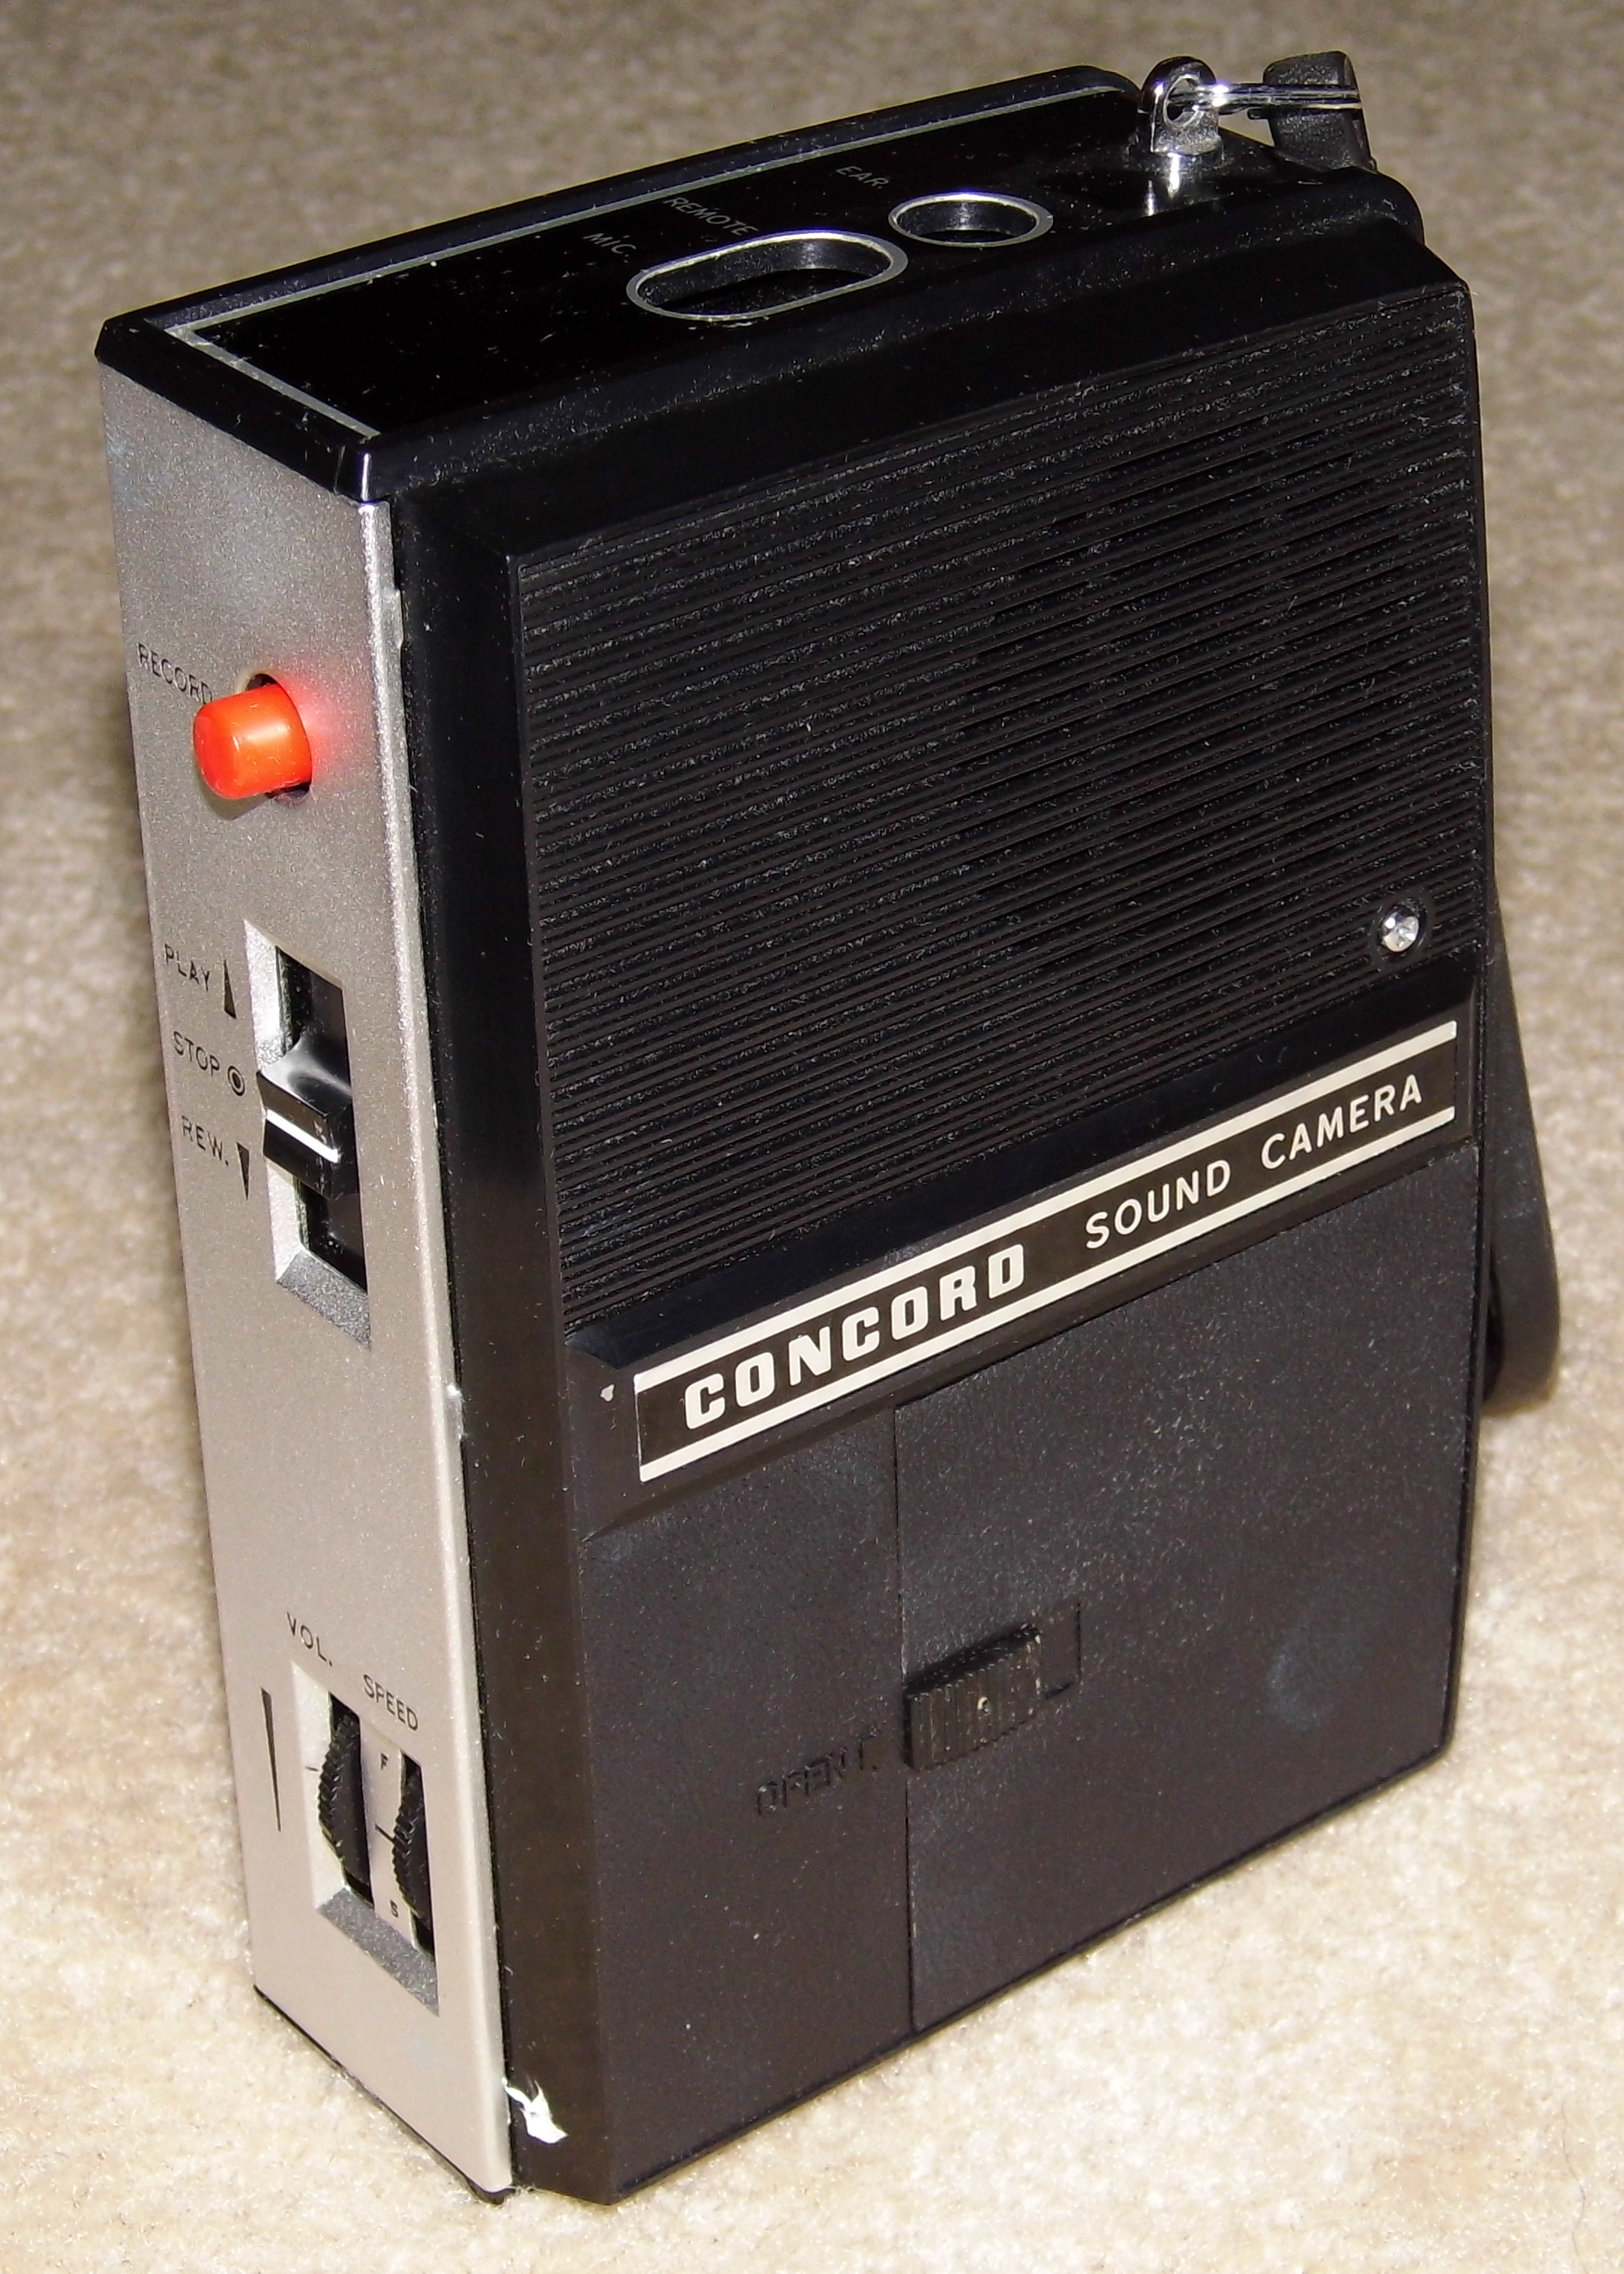 File:Vintage Concord Sound Camera Reel-To-Reel Tape Recorder, Model F-20,  Made In Japan (14182450972).jpg - Wikimedia Commons